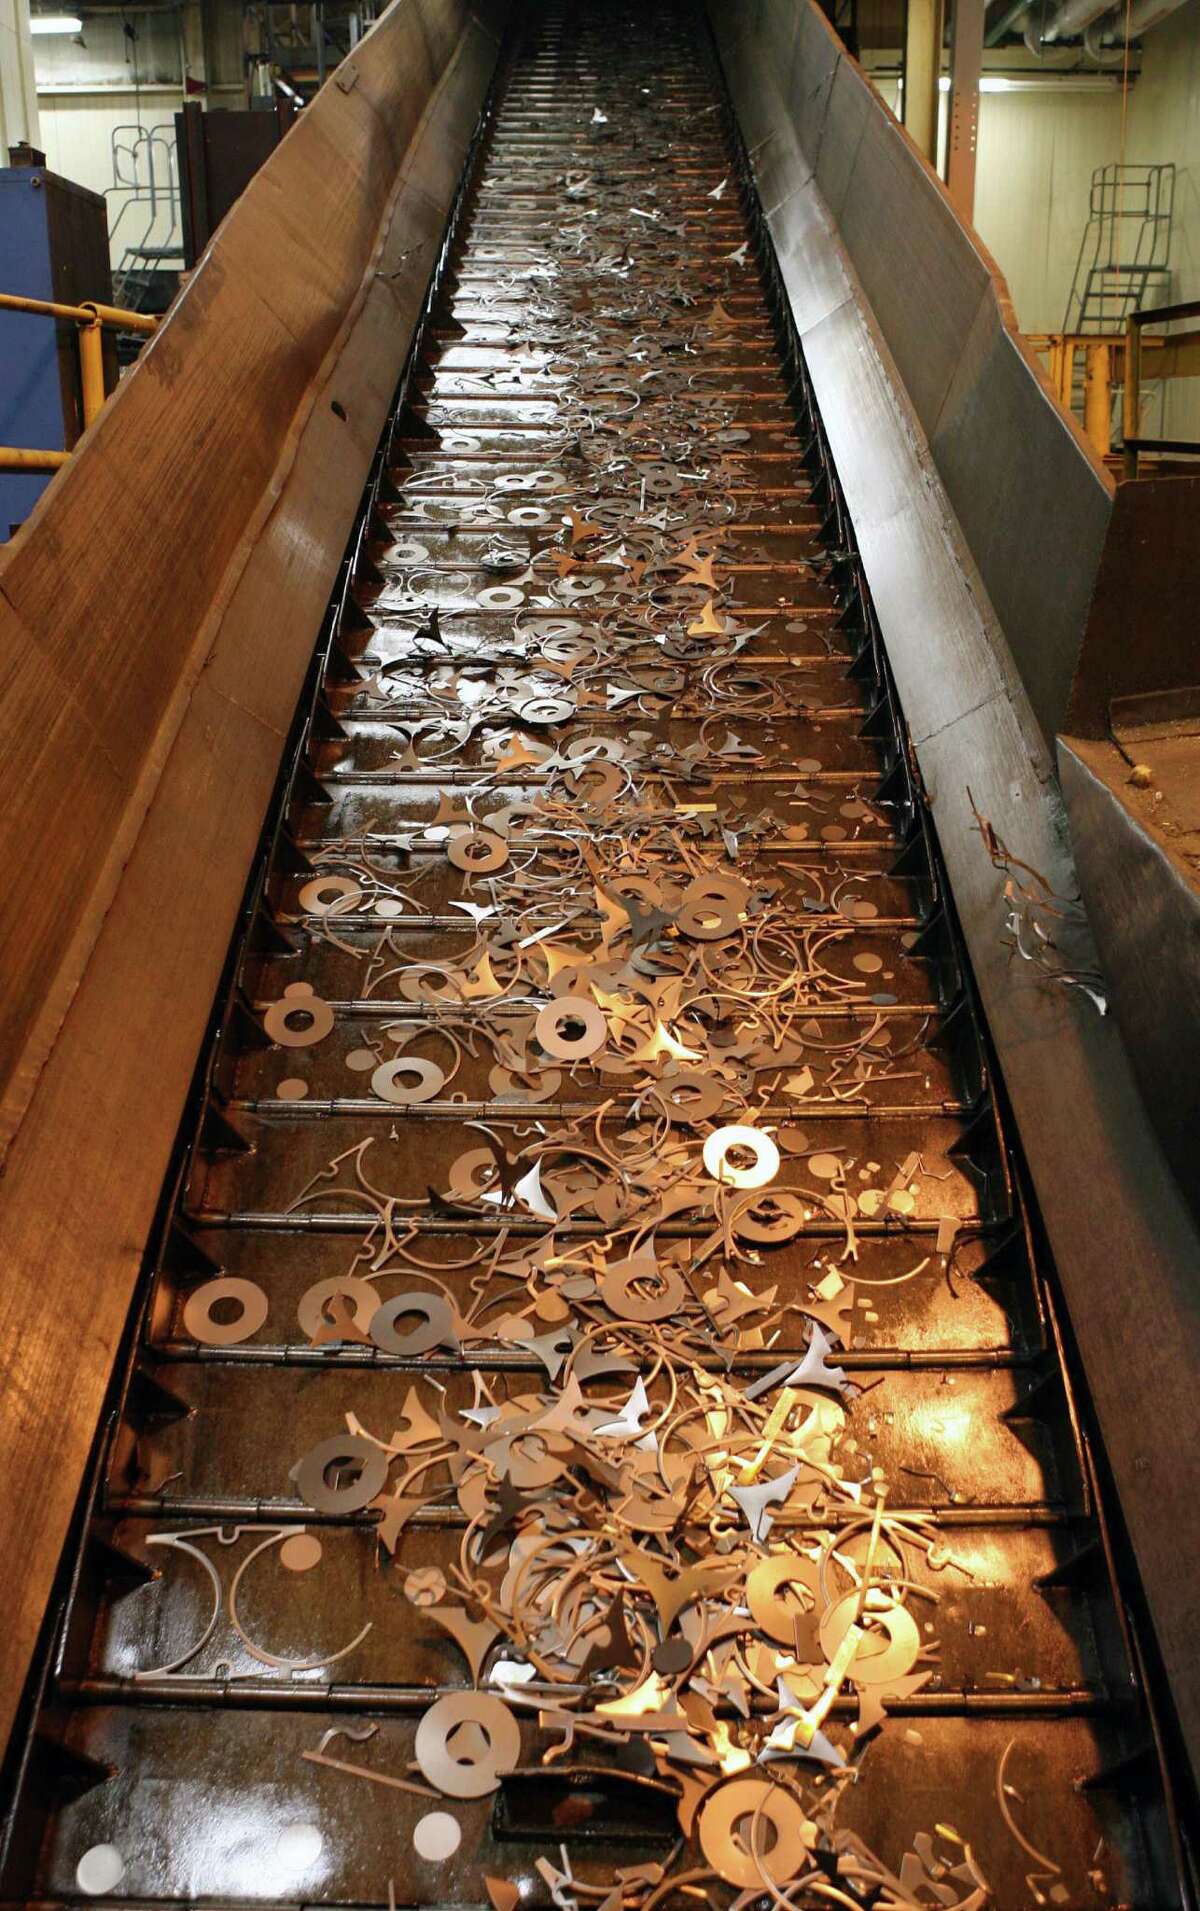 Metal scraps were moved along a conveyor belt for recycling at the General Motors Transmission Plant in Warren, Mich., in 2008.